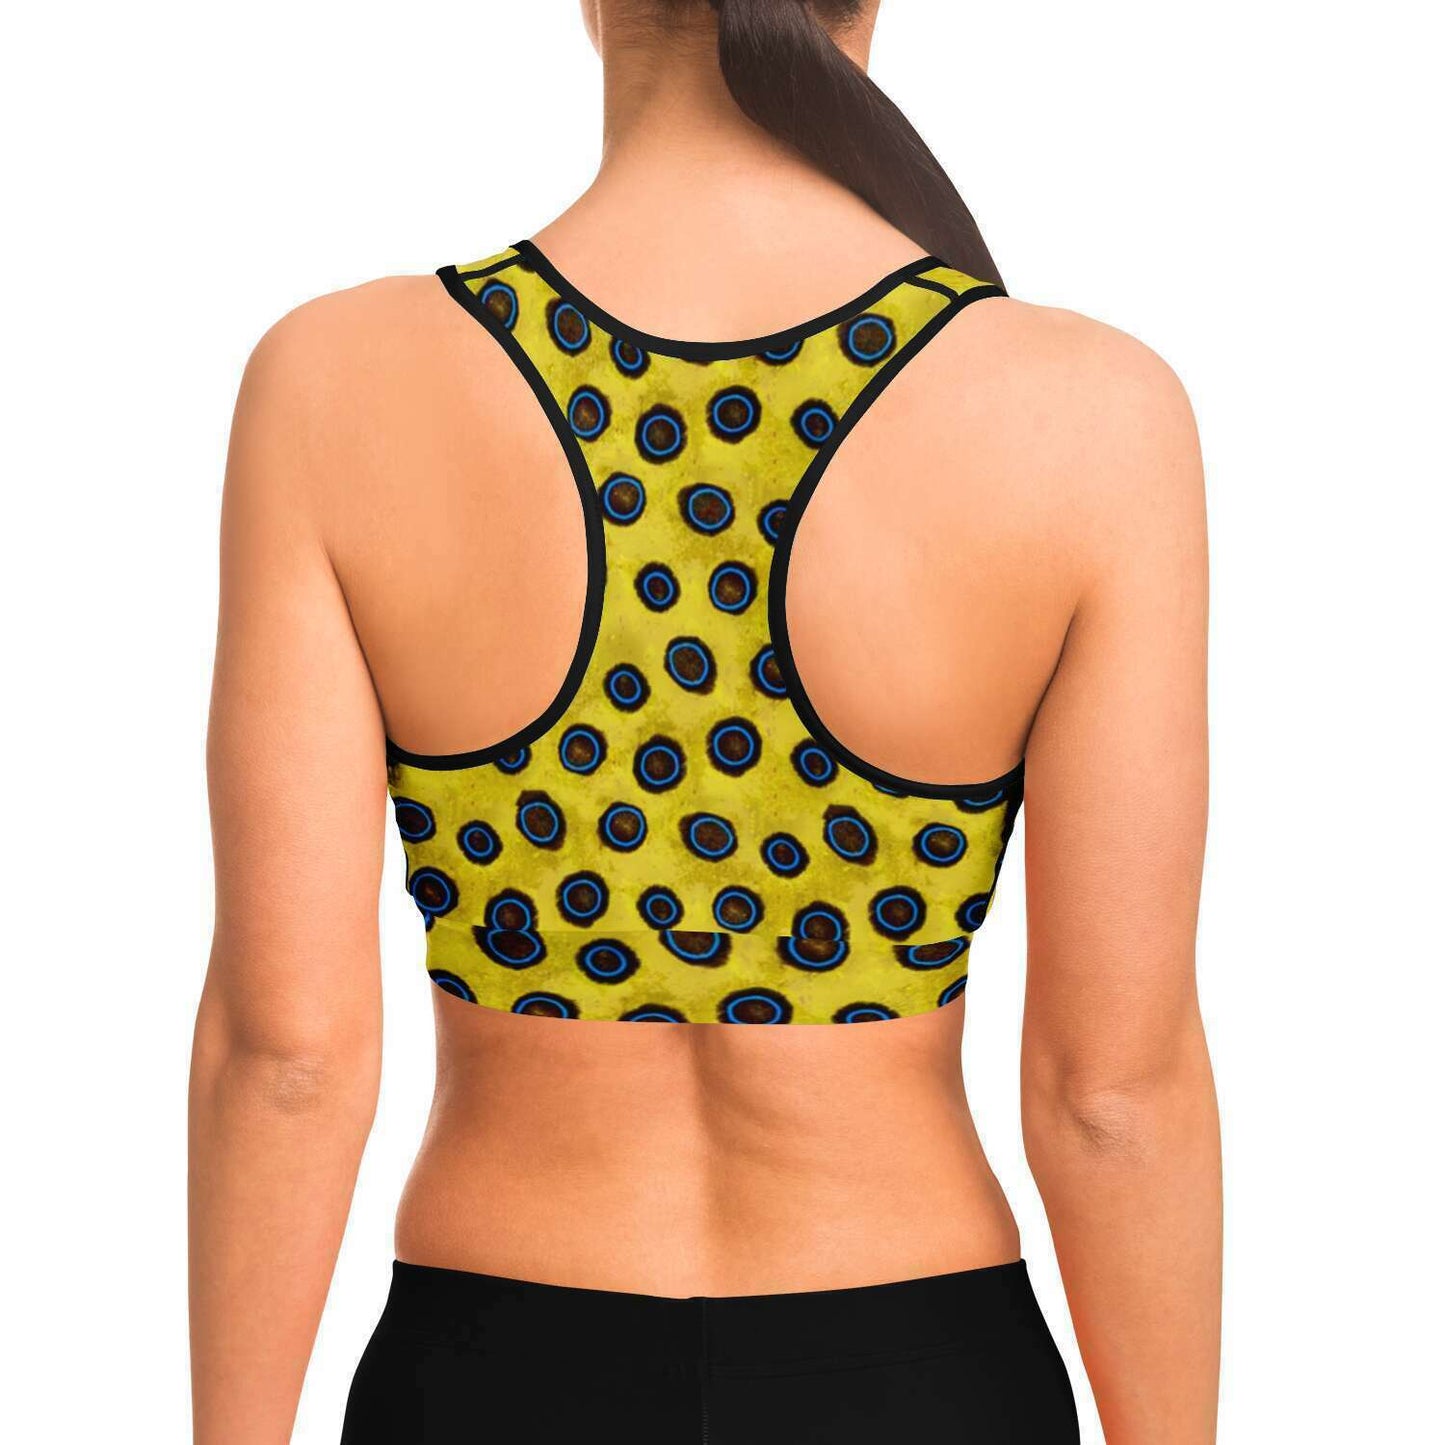 Back view of model wearing Blue-ringed octopus racer-back crop top / sports bra for any medium impact sport including scuba diving